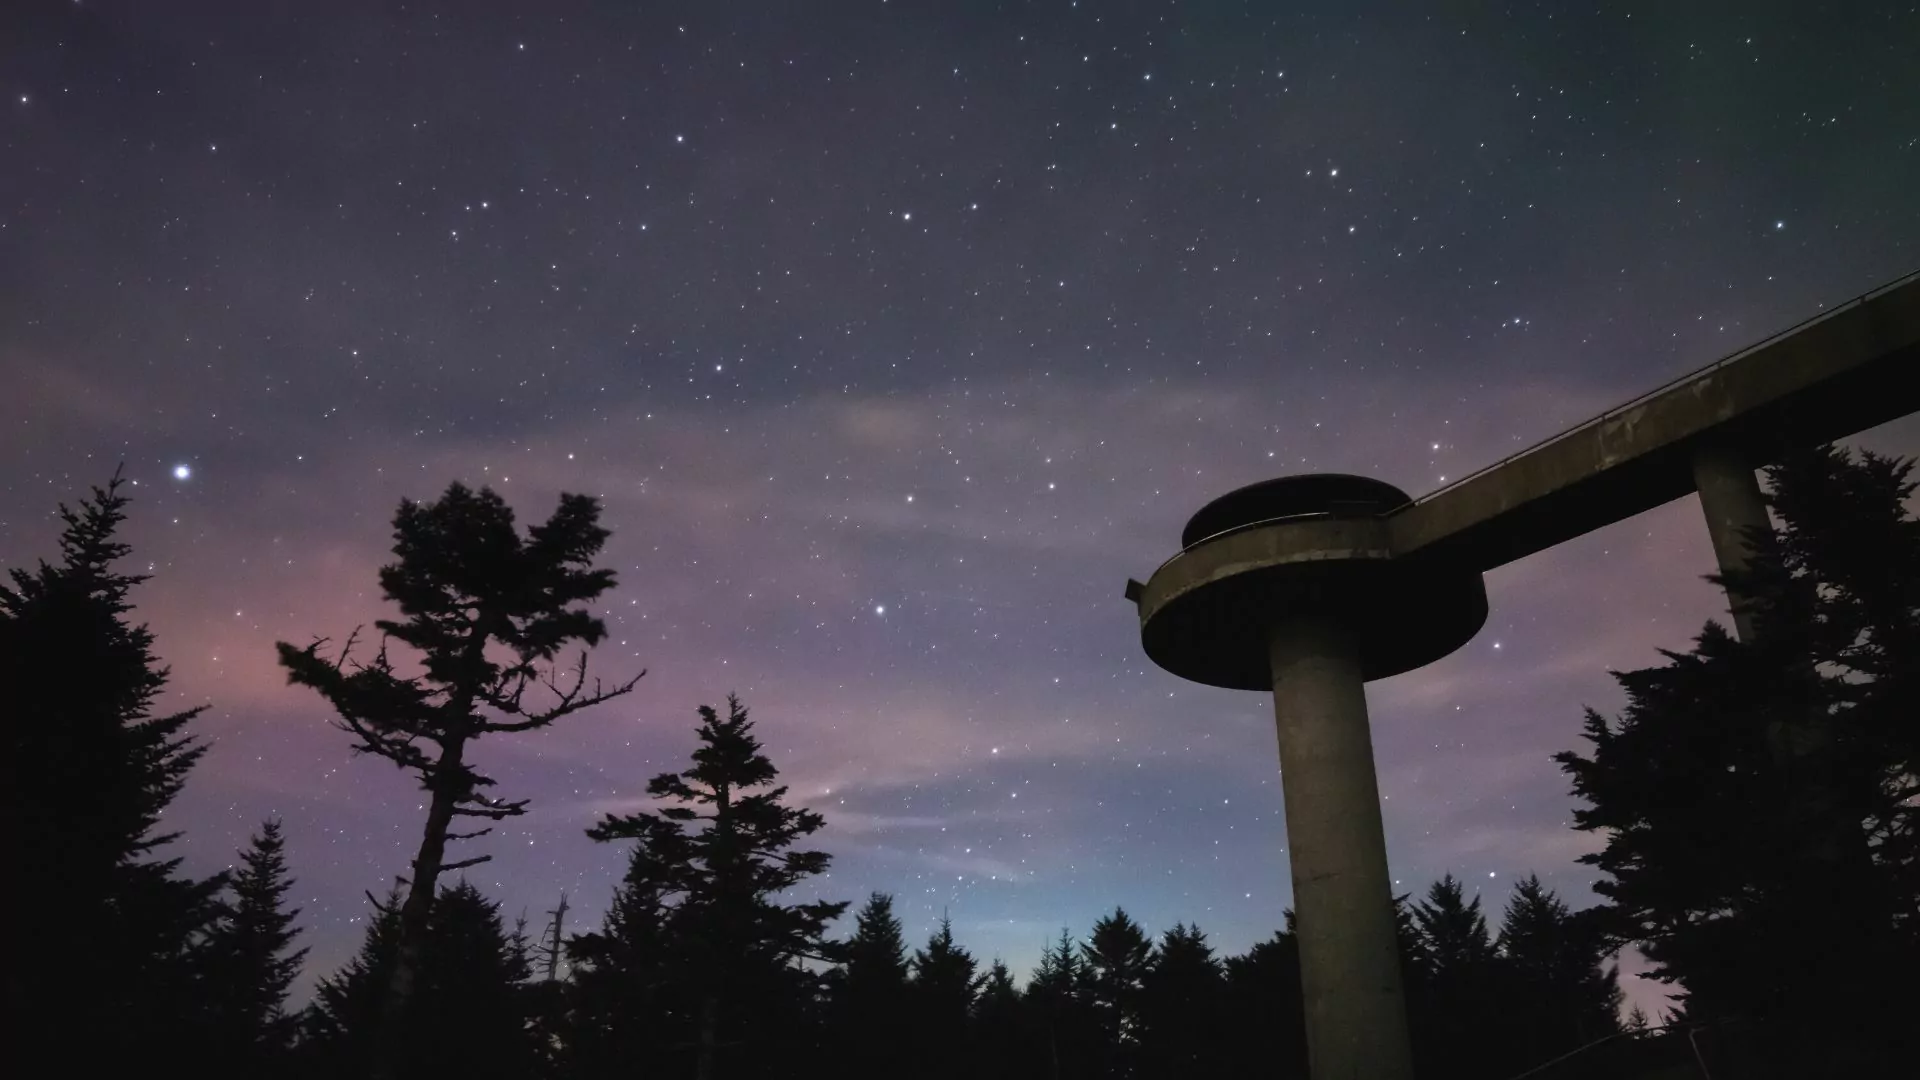 Clingman's Dome juts out over darkened treetops under a starry sky